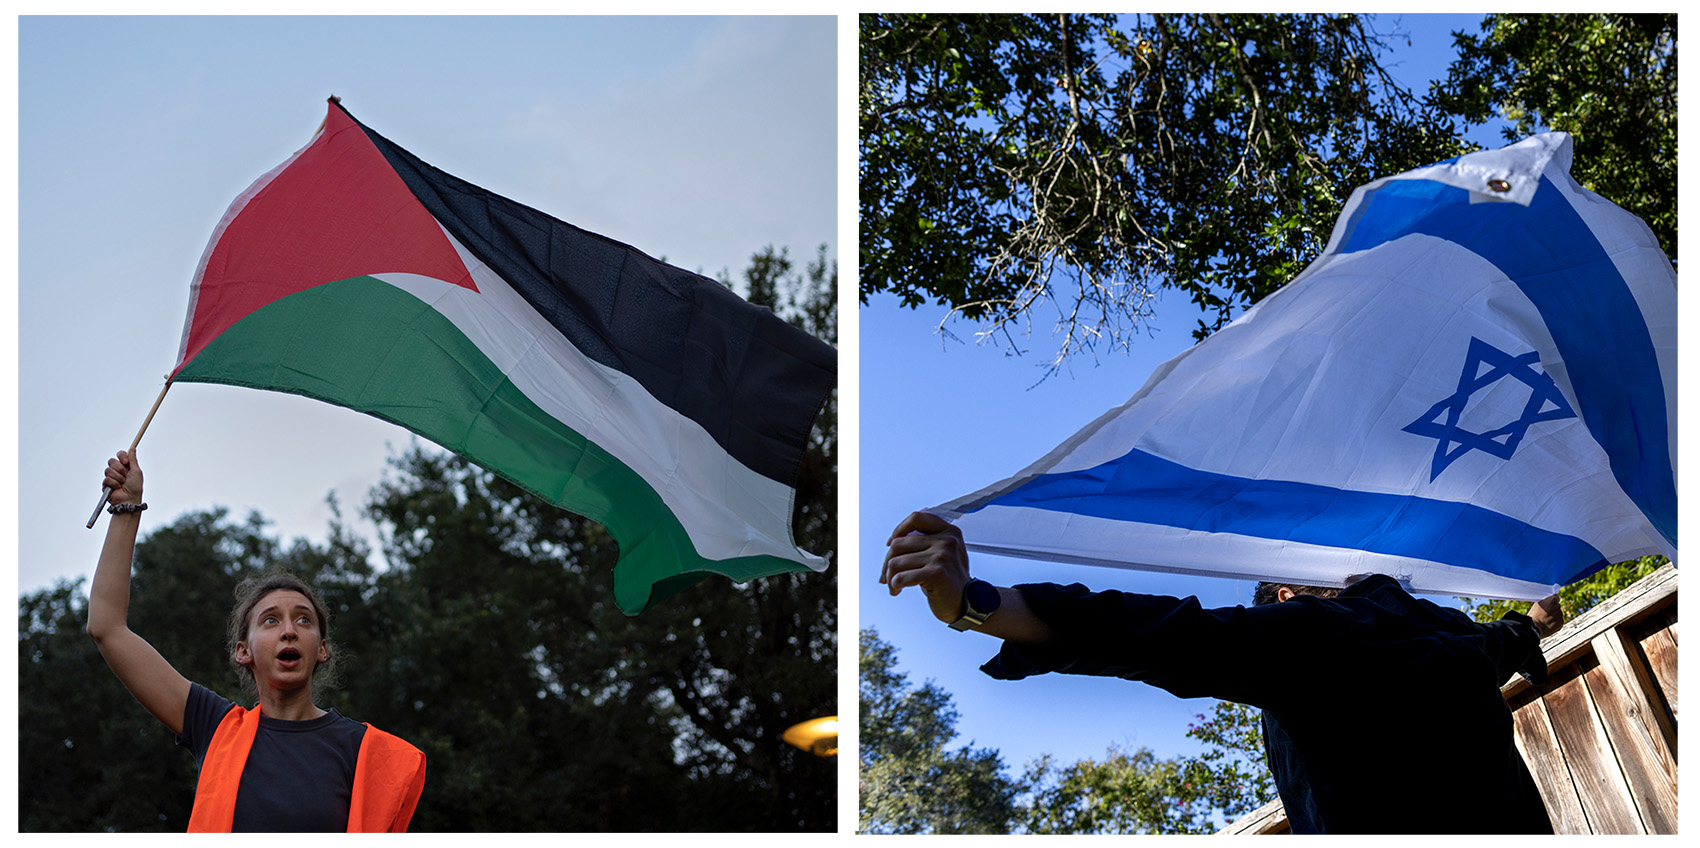 Palestinian and Israeli flags in Houston